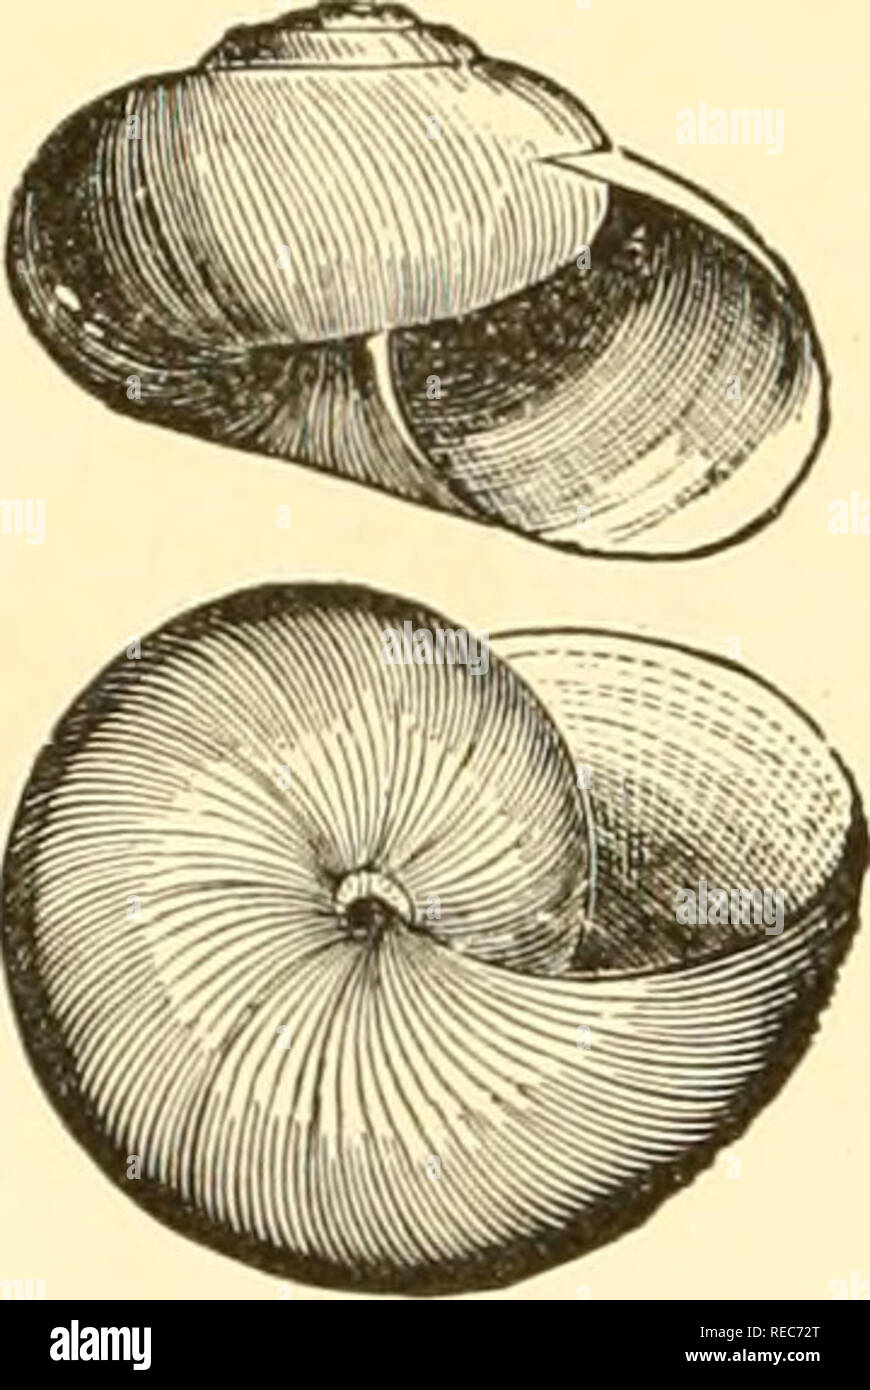 . Conchologia cestrica. The molluscous animals and their shells, of Chester county, Pa. Mollusks. 3^ CONCHOLOGIA CESTRICA. Z. Icpvif/fittis [B. &amp; B.] Fig, 47. Z. laevigatus, Pfr. Helix laevigata, Pfr., Mon. Hel. Viv., I., 1848. Shell globosely depressed, thin, green- ish horn color; whorls 5, closely striate above, smooth, and shining, beneath; last whorl rapidly expanding ; aperture rounded-lunular; lip simple, much thick- ened, within the base, and slightly re- flected, around a moderate umbilicus. H. 9, W. 18, mill. Station, mountains. Sunbury, Penn- sylvania.. Z. inoruatus [B. &amp; B. Stock Photo